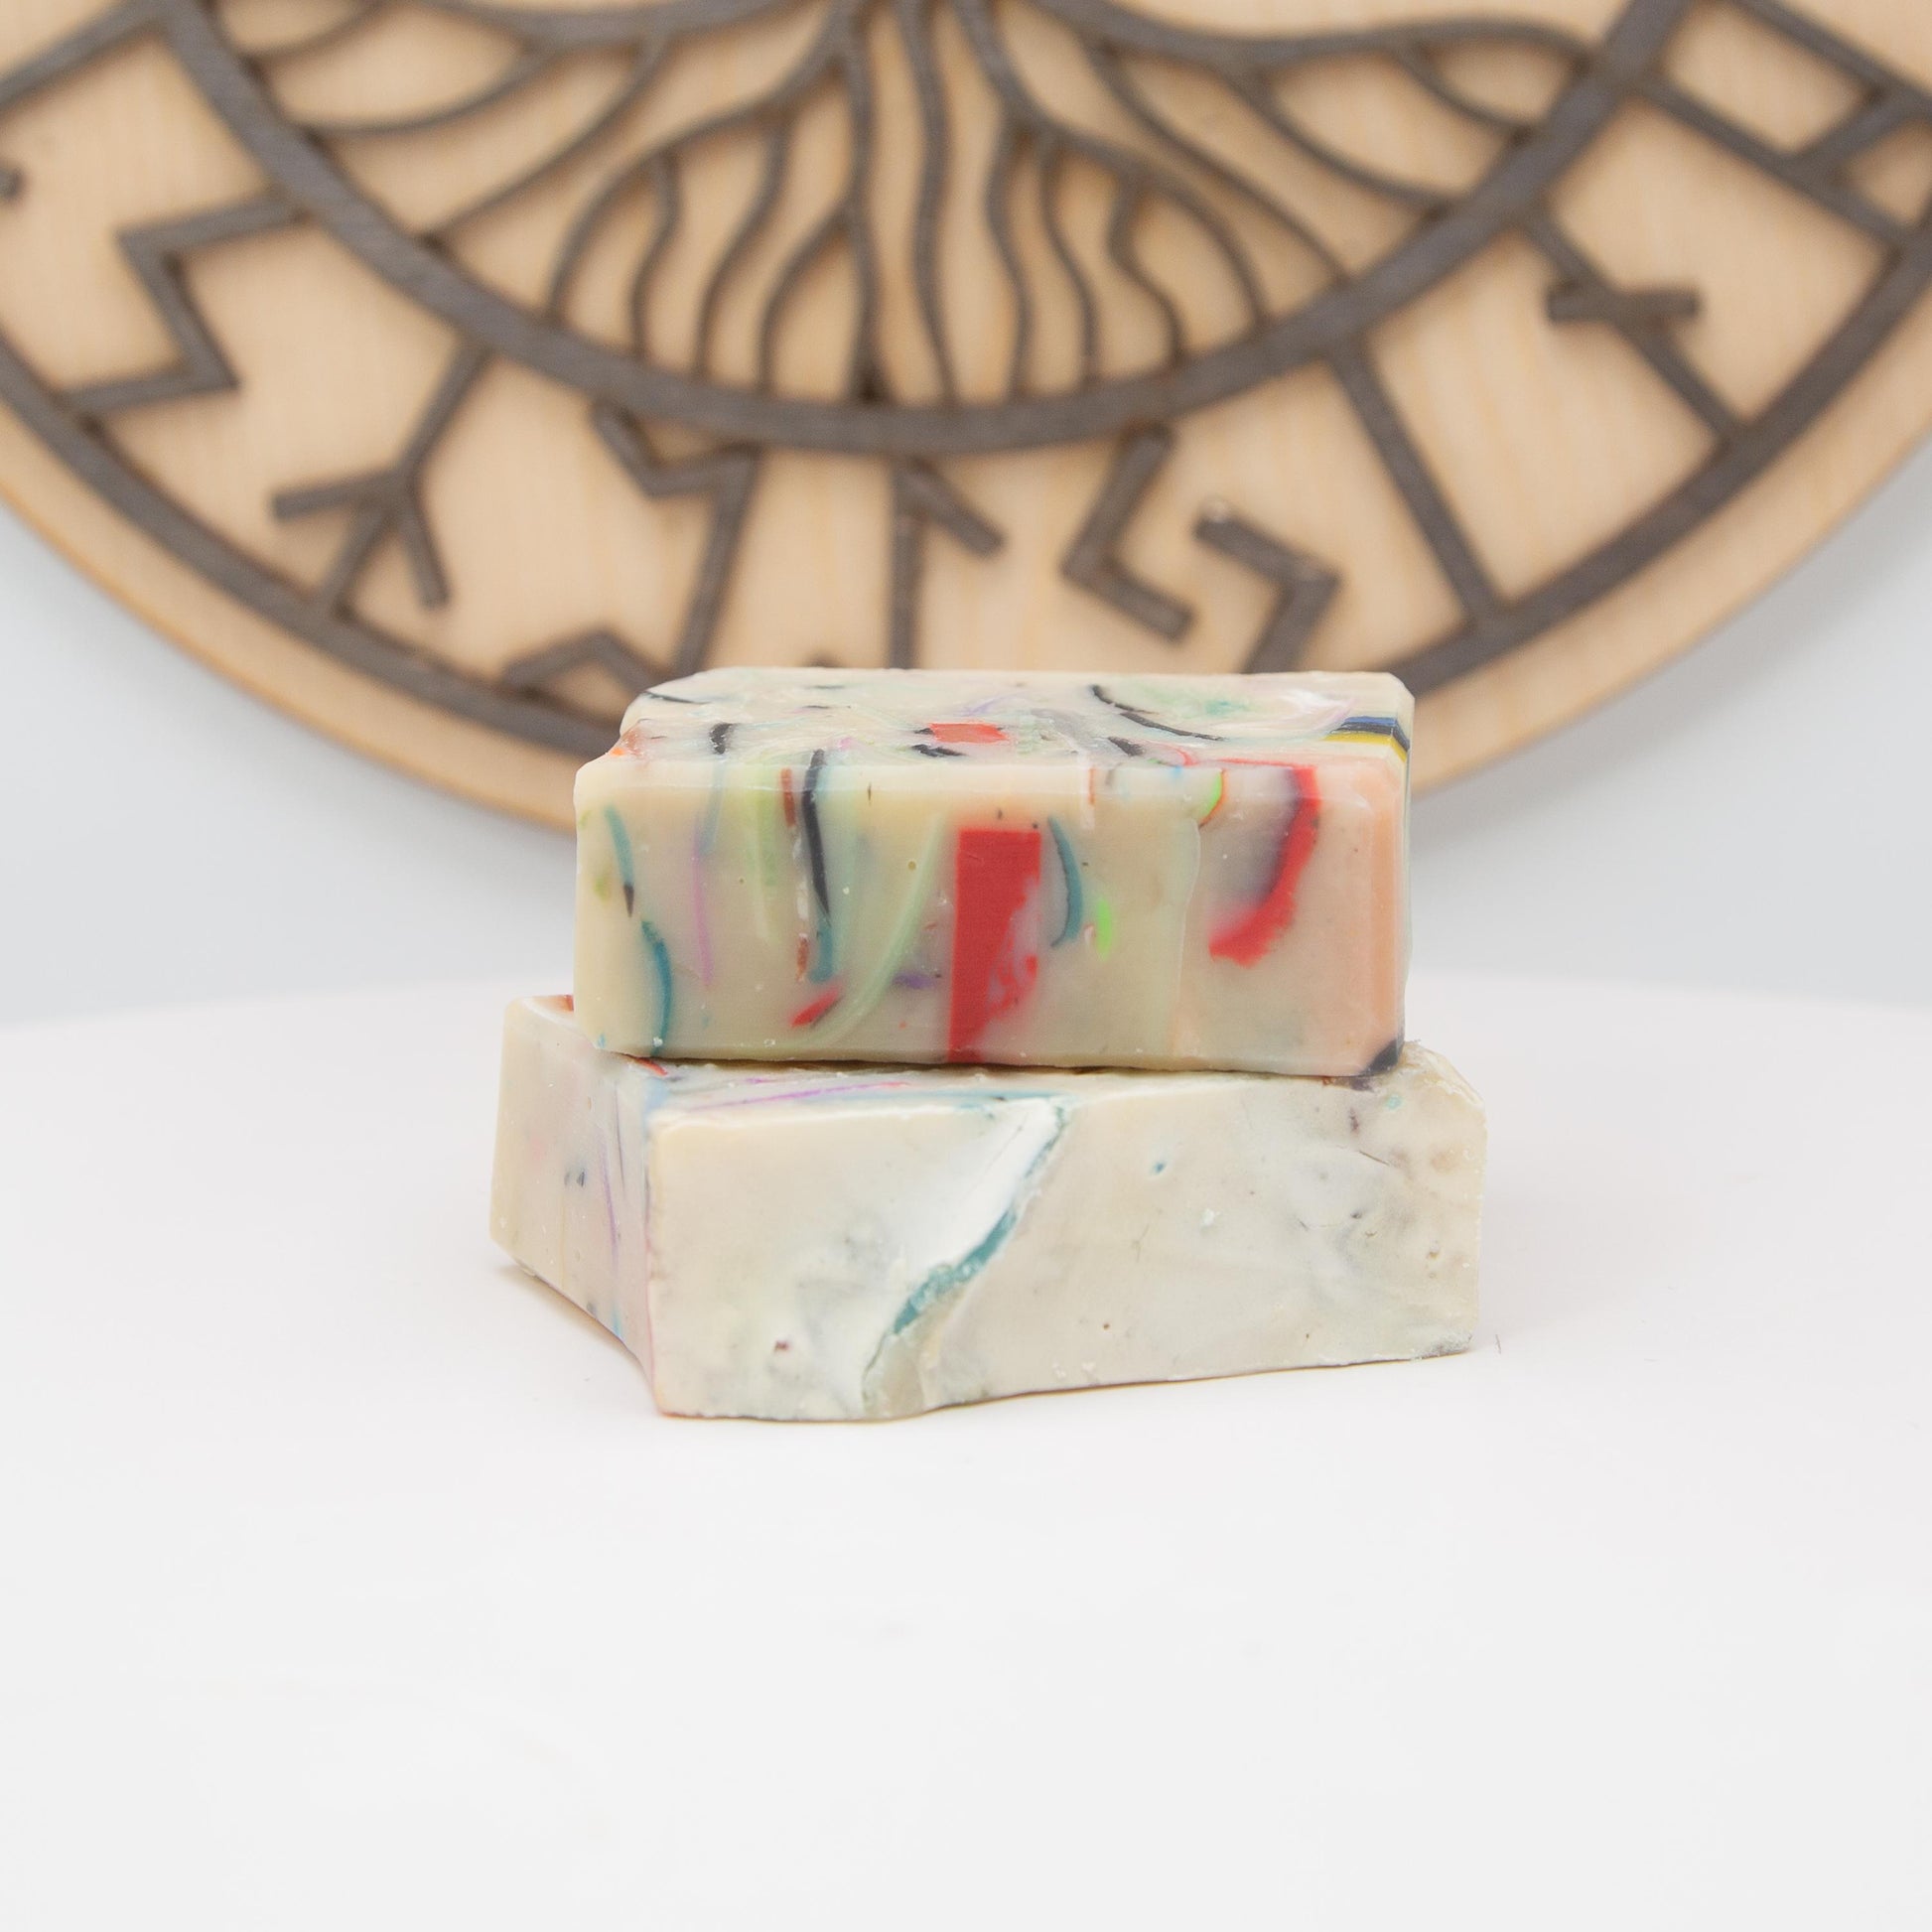 Baba Yaga - Spearmint, Basil, Rosemary, Peppermint, Old Books, Devil's Door (Patchouli, Black Pepper, and Vanilla), and Rose Soap, Birds of Valhalla, Limited, Birds of Valhalla